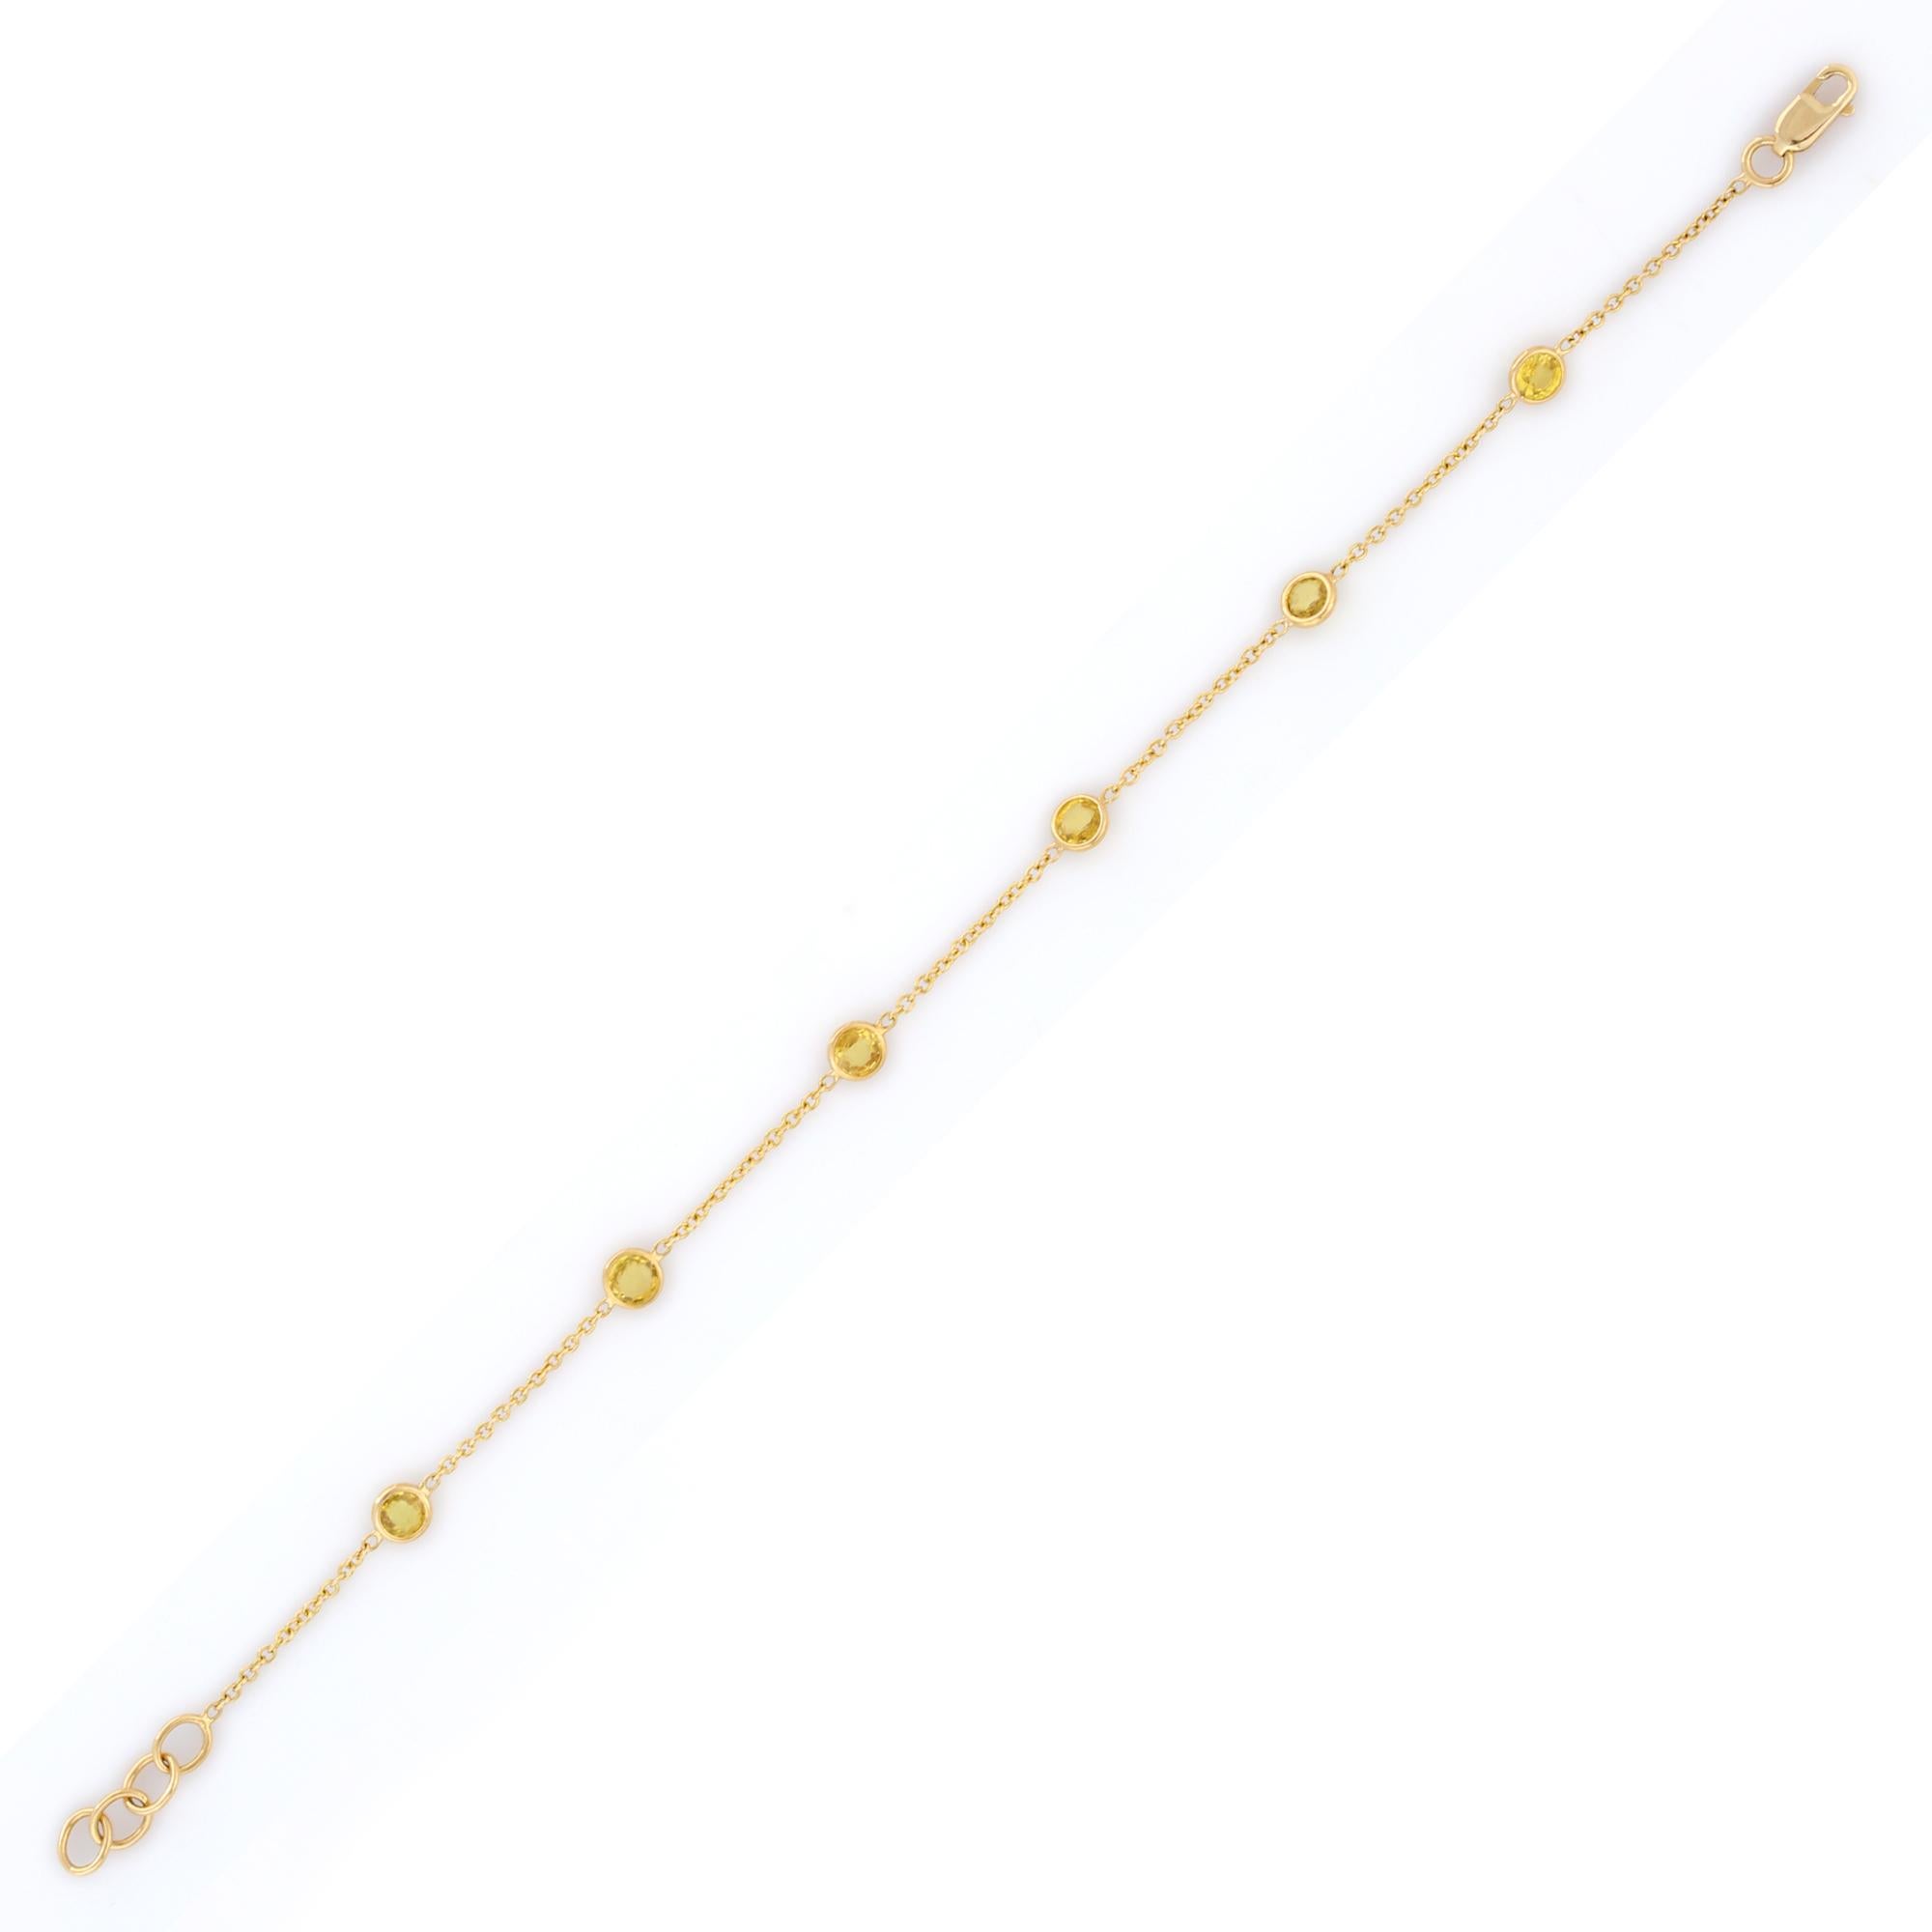 Minimalist Round Cut Yellow Sapphire Chain Bracelet Mounted in 18K Yellow Gold In New Condition For Sale In Houston, TX